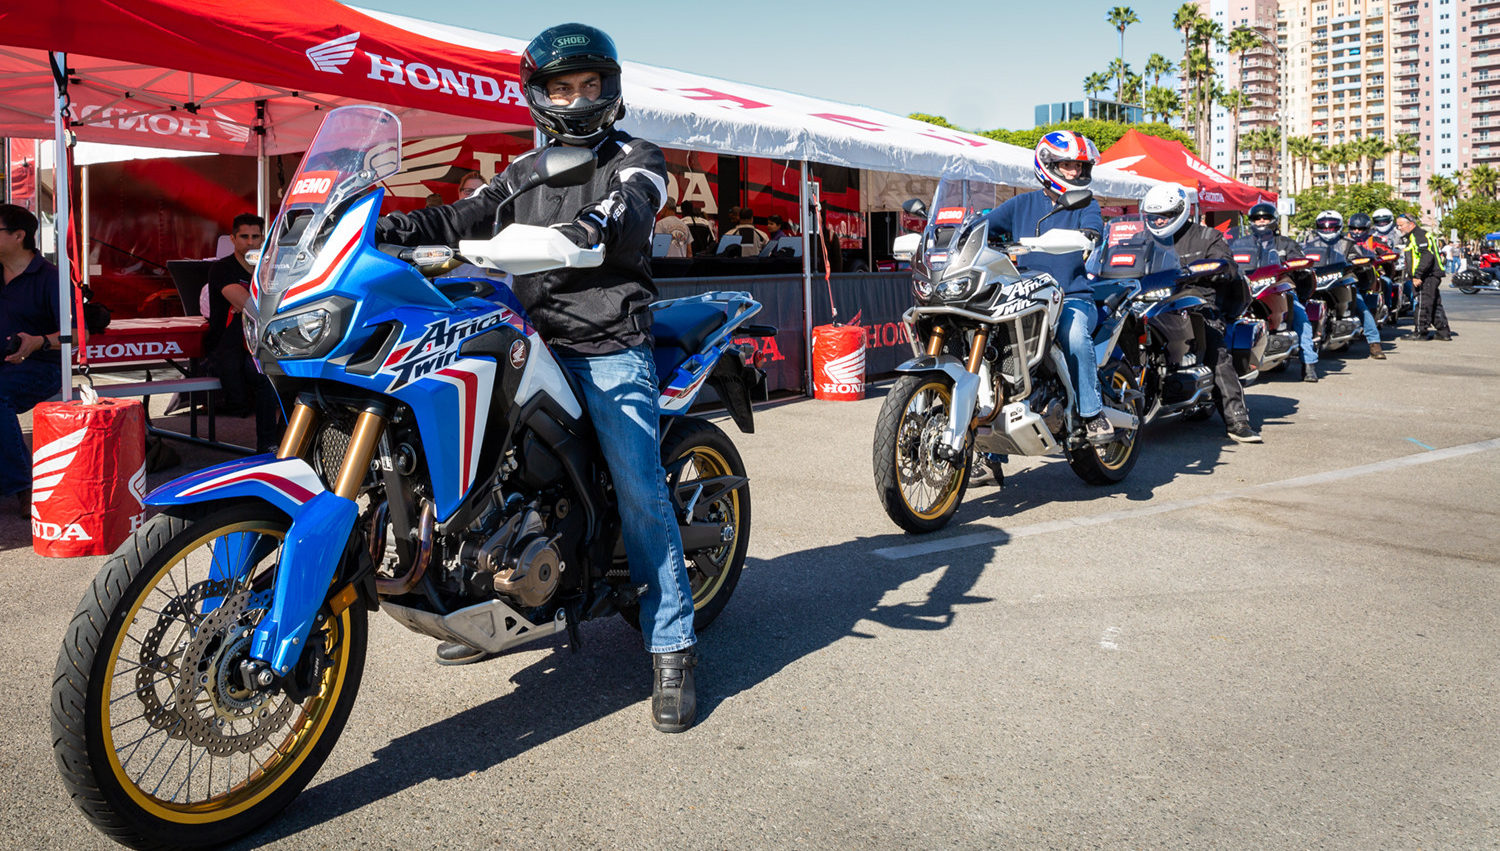 The Progressive International Motorcycle Shows tour is moving to an outdoor event model starting in 2021. Photo courtesy Progressive International Motorcycle Shows.